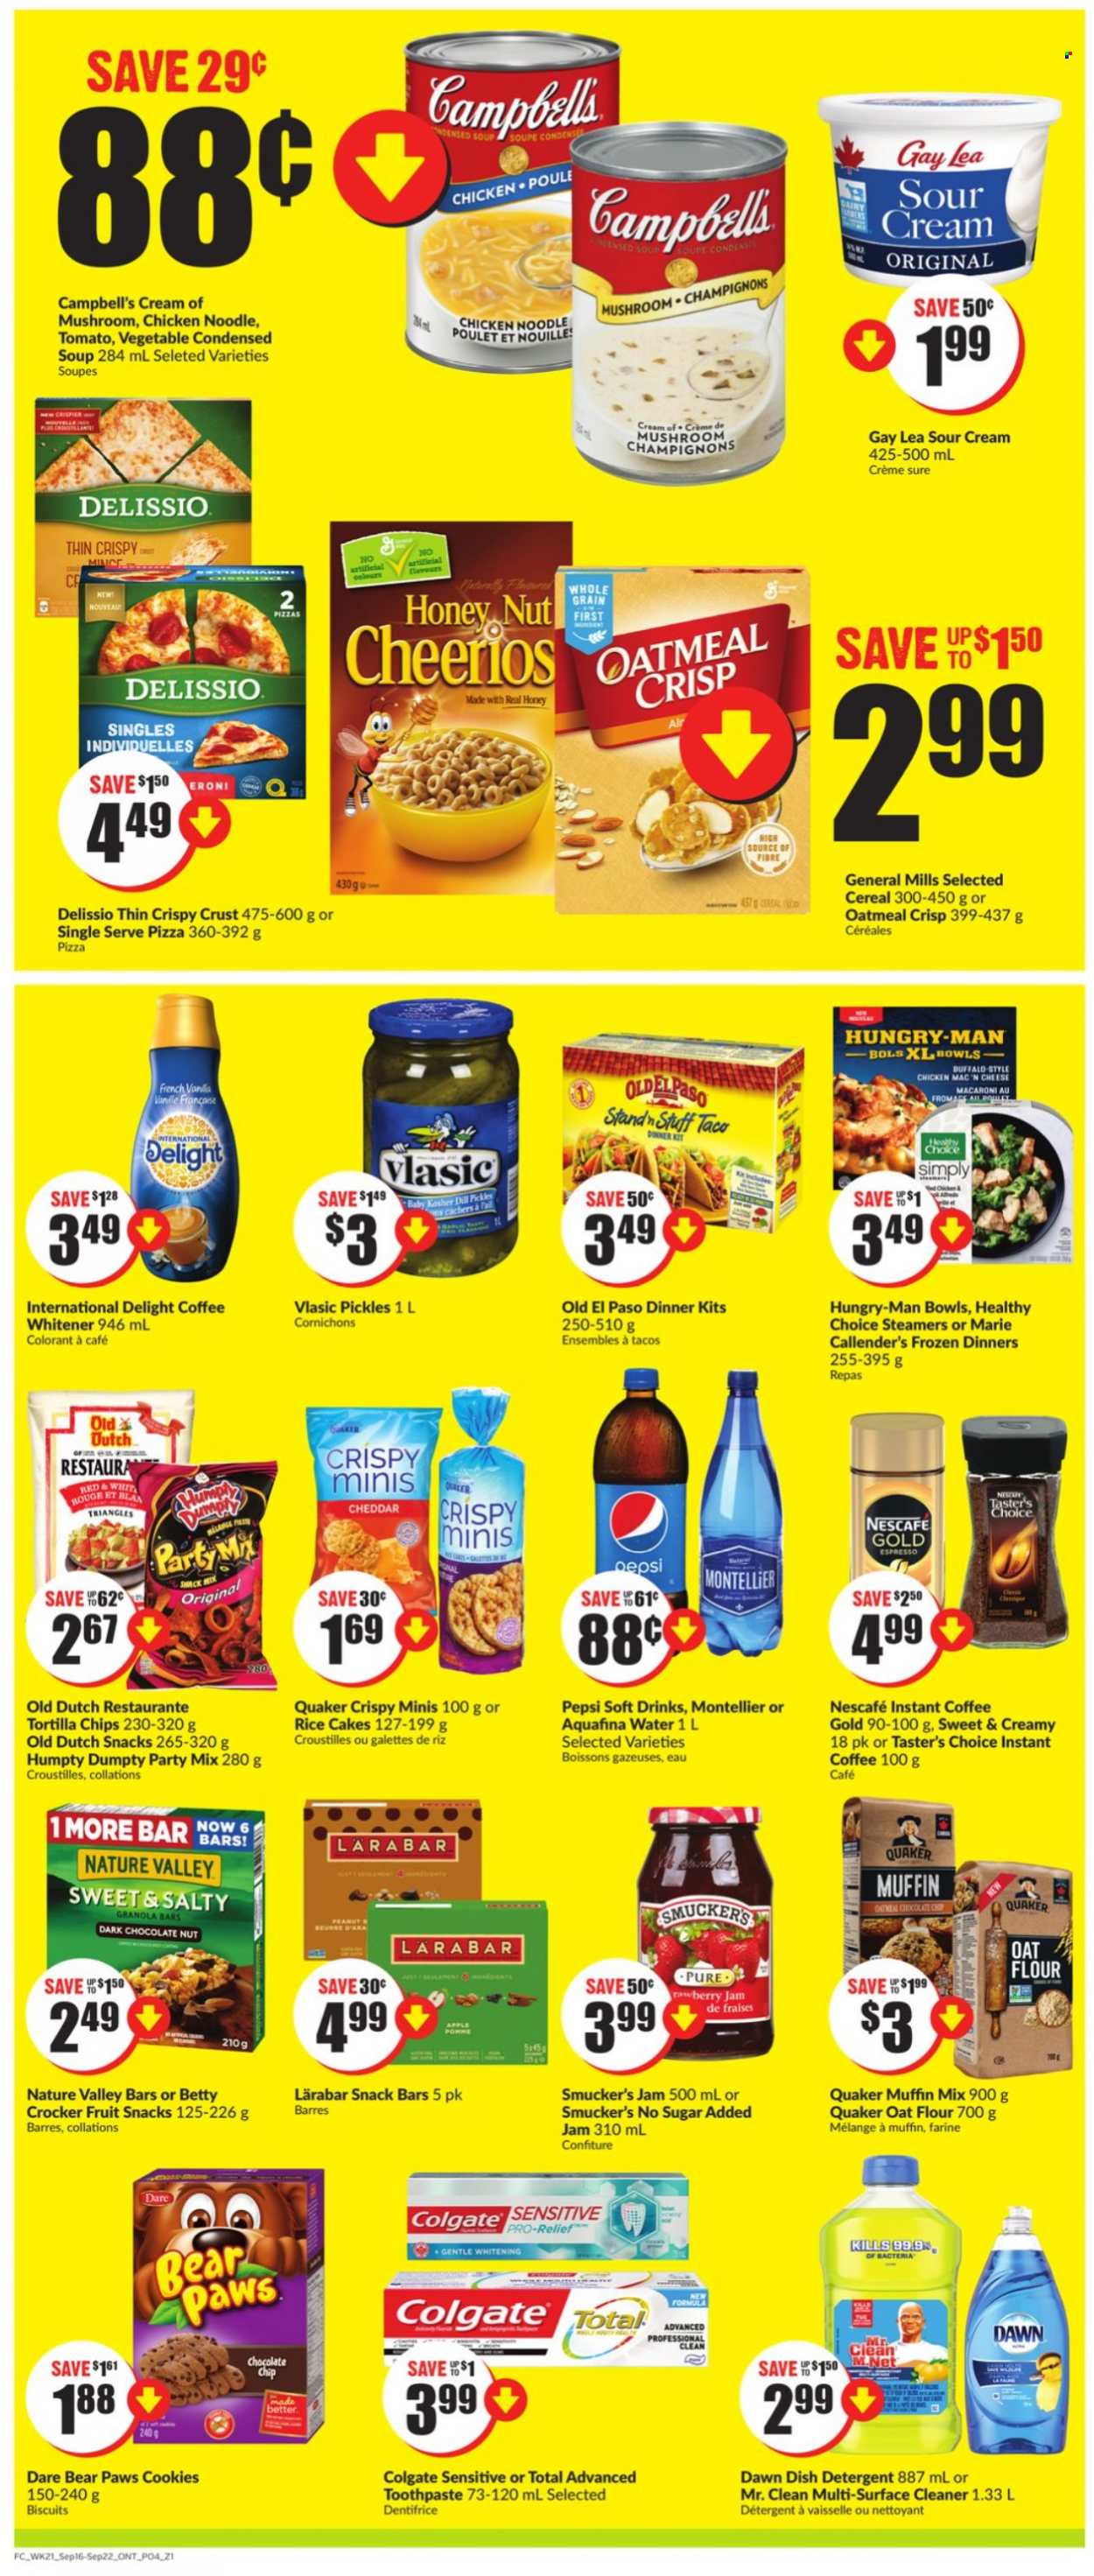 thumbnail - Chalo! FreshCo. Flyer - September 16, 2021 - September 22, 2021 - Sales products - Old El Paso, tacos, muffin mix, Campbell's, pizza, macaroni, condensed soup, soup, dinner kit, Quaker, noodles, instant soup, Healthy Choice, Marie Callender's, sour cream, cookies, biscuit, dark chocolate, fruit snack, snack bar, tortilla chips, oatmeal, oats, pickles, cereals, Cheerios, granola bar, Nature Valley, fruit jam, Pepsi, soft drink, Aquafina, instant coffee, detergent, Colgate, Nescafé. Page 4.